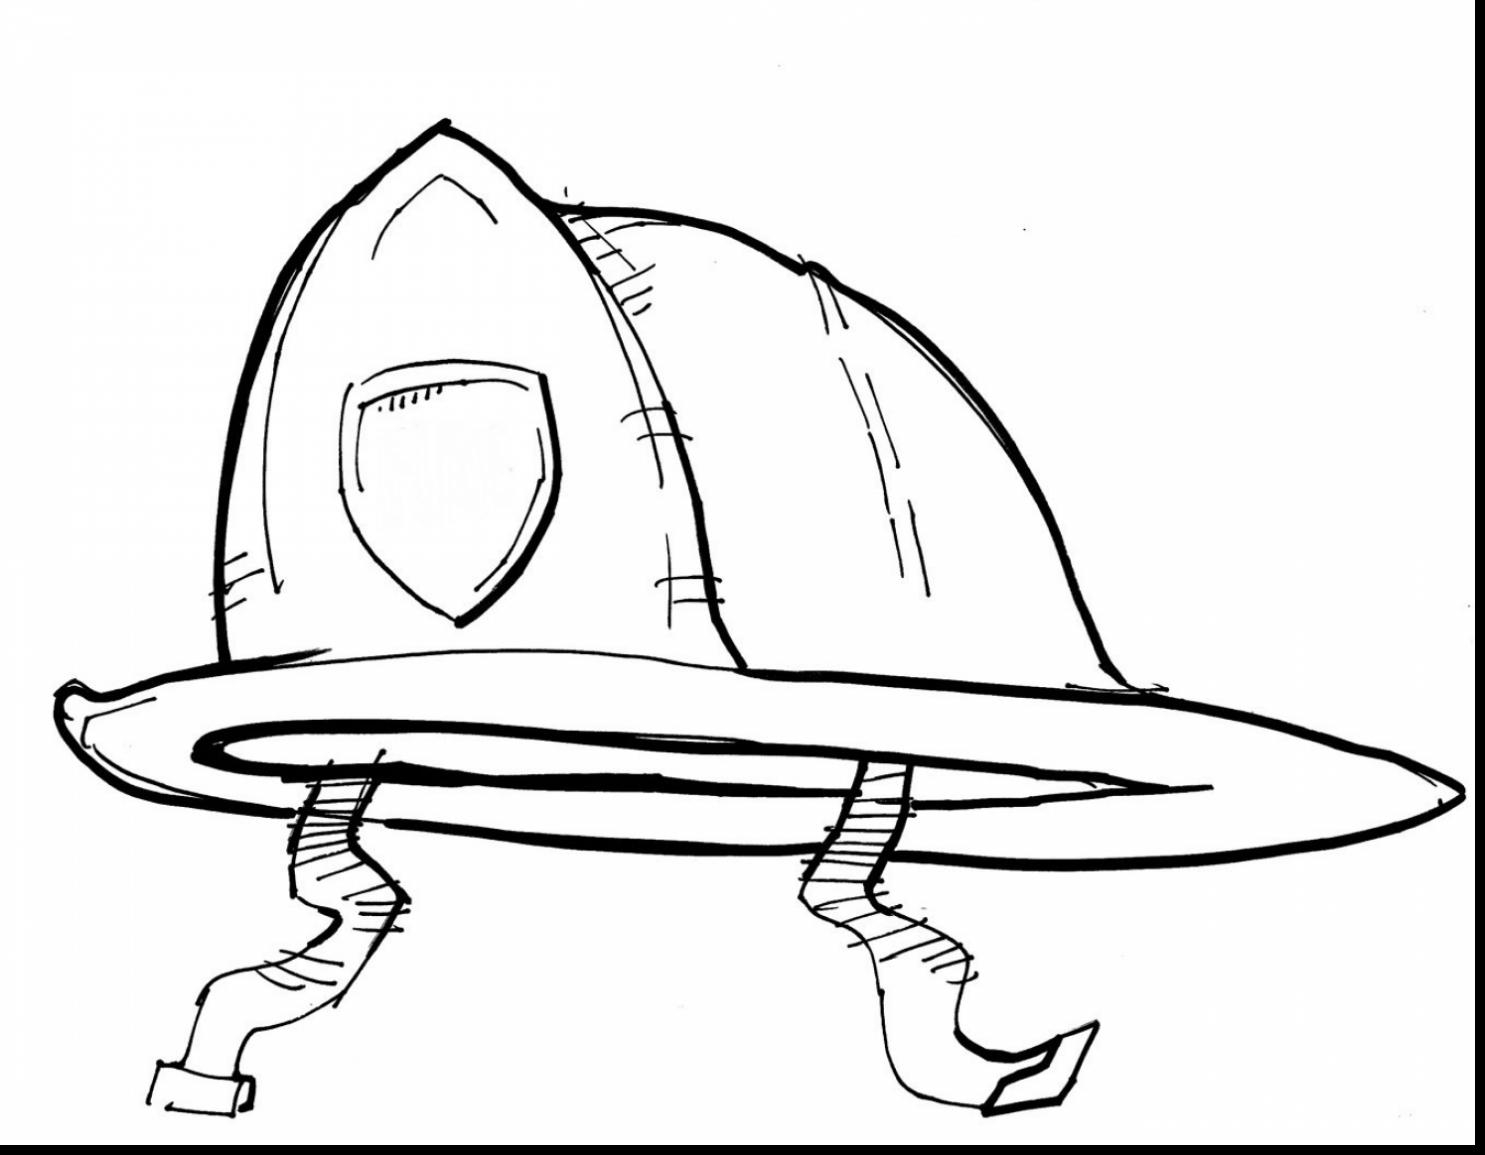 Hard Hat Coloring Page Firefighter Hat Templates Free Download Best Firefighter Hat